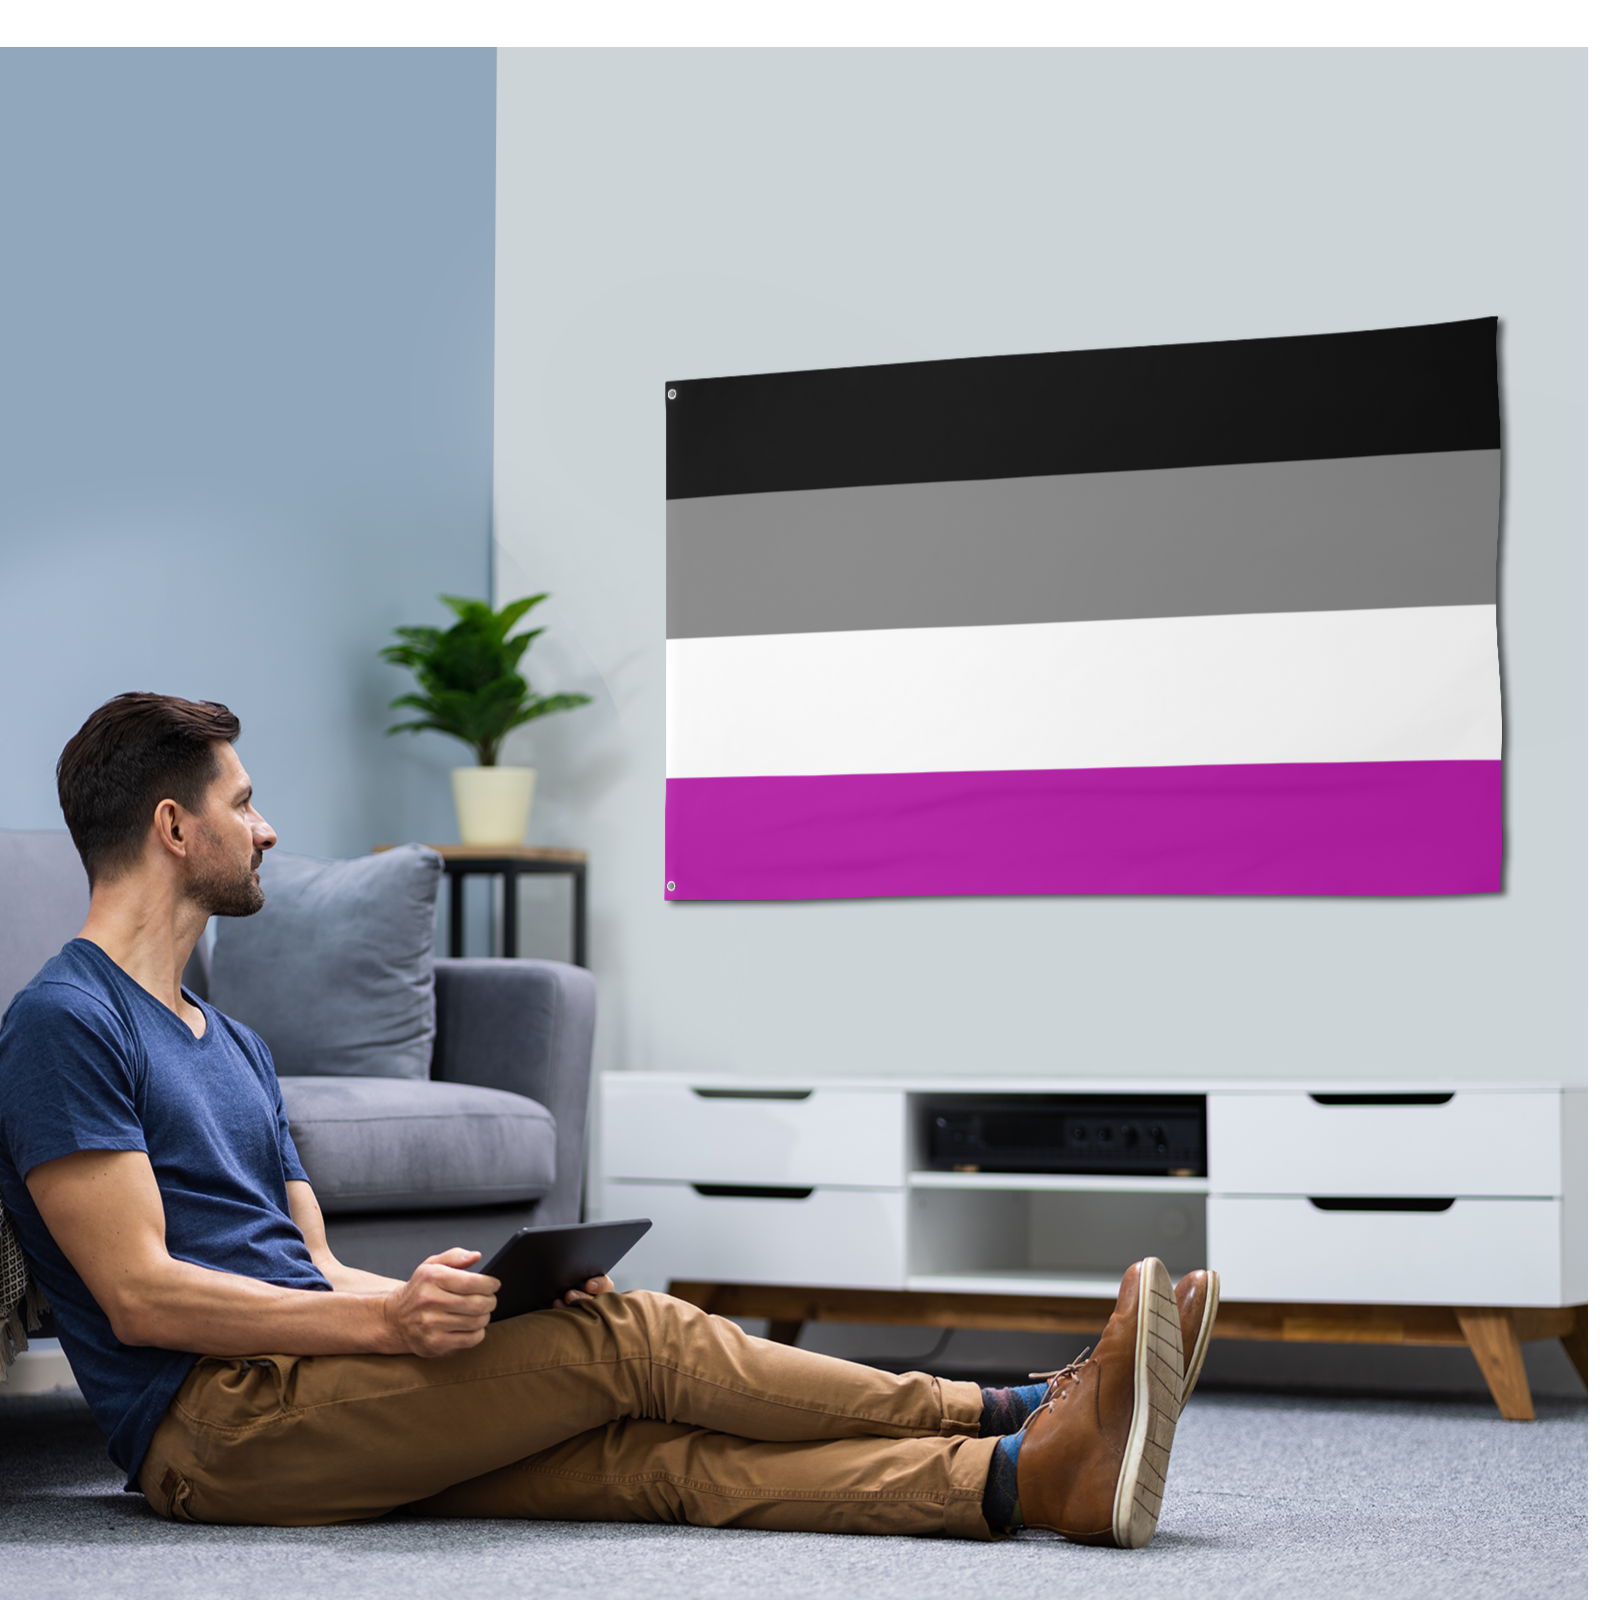 Asexual Pride Flag